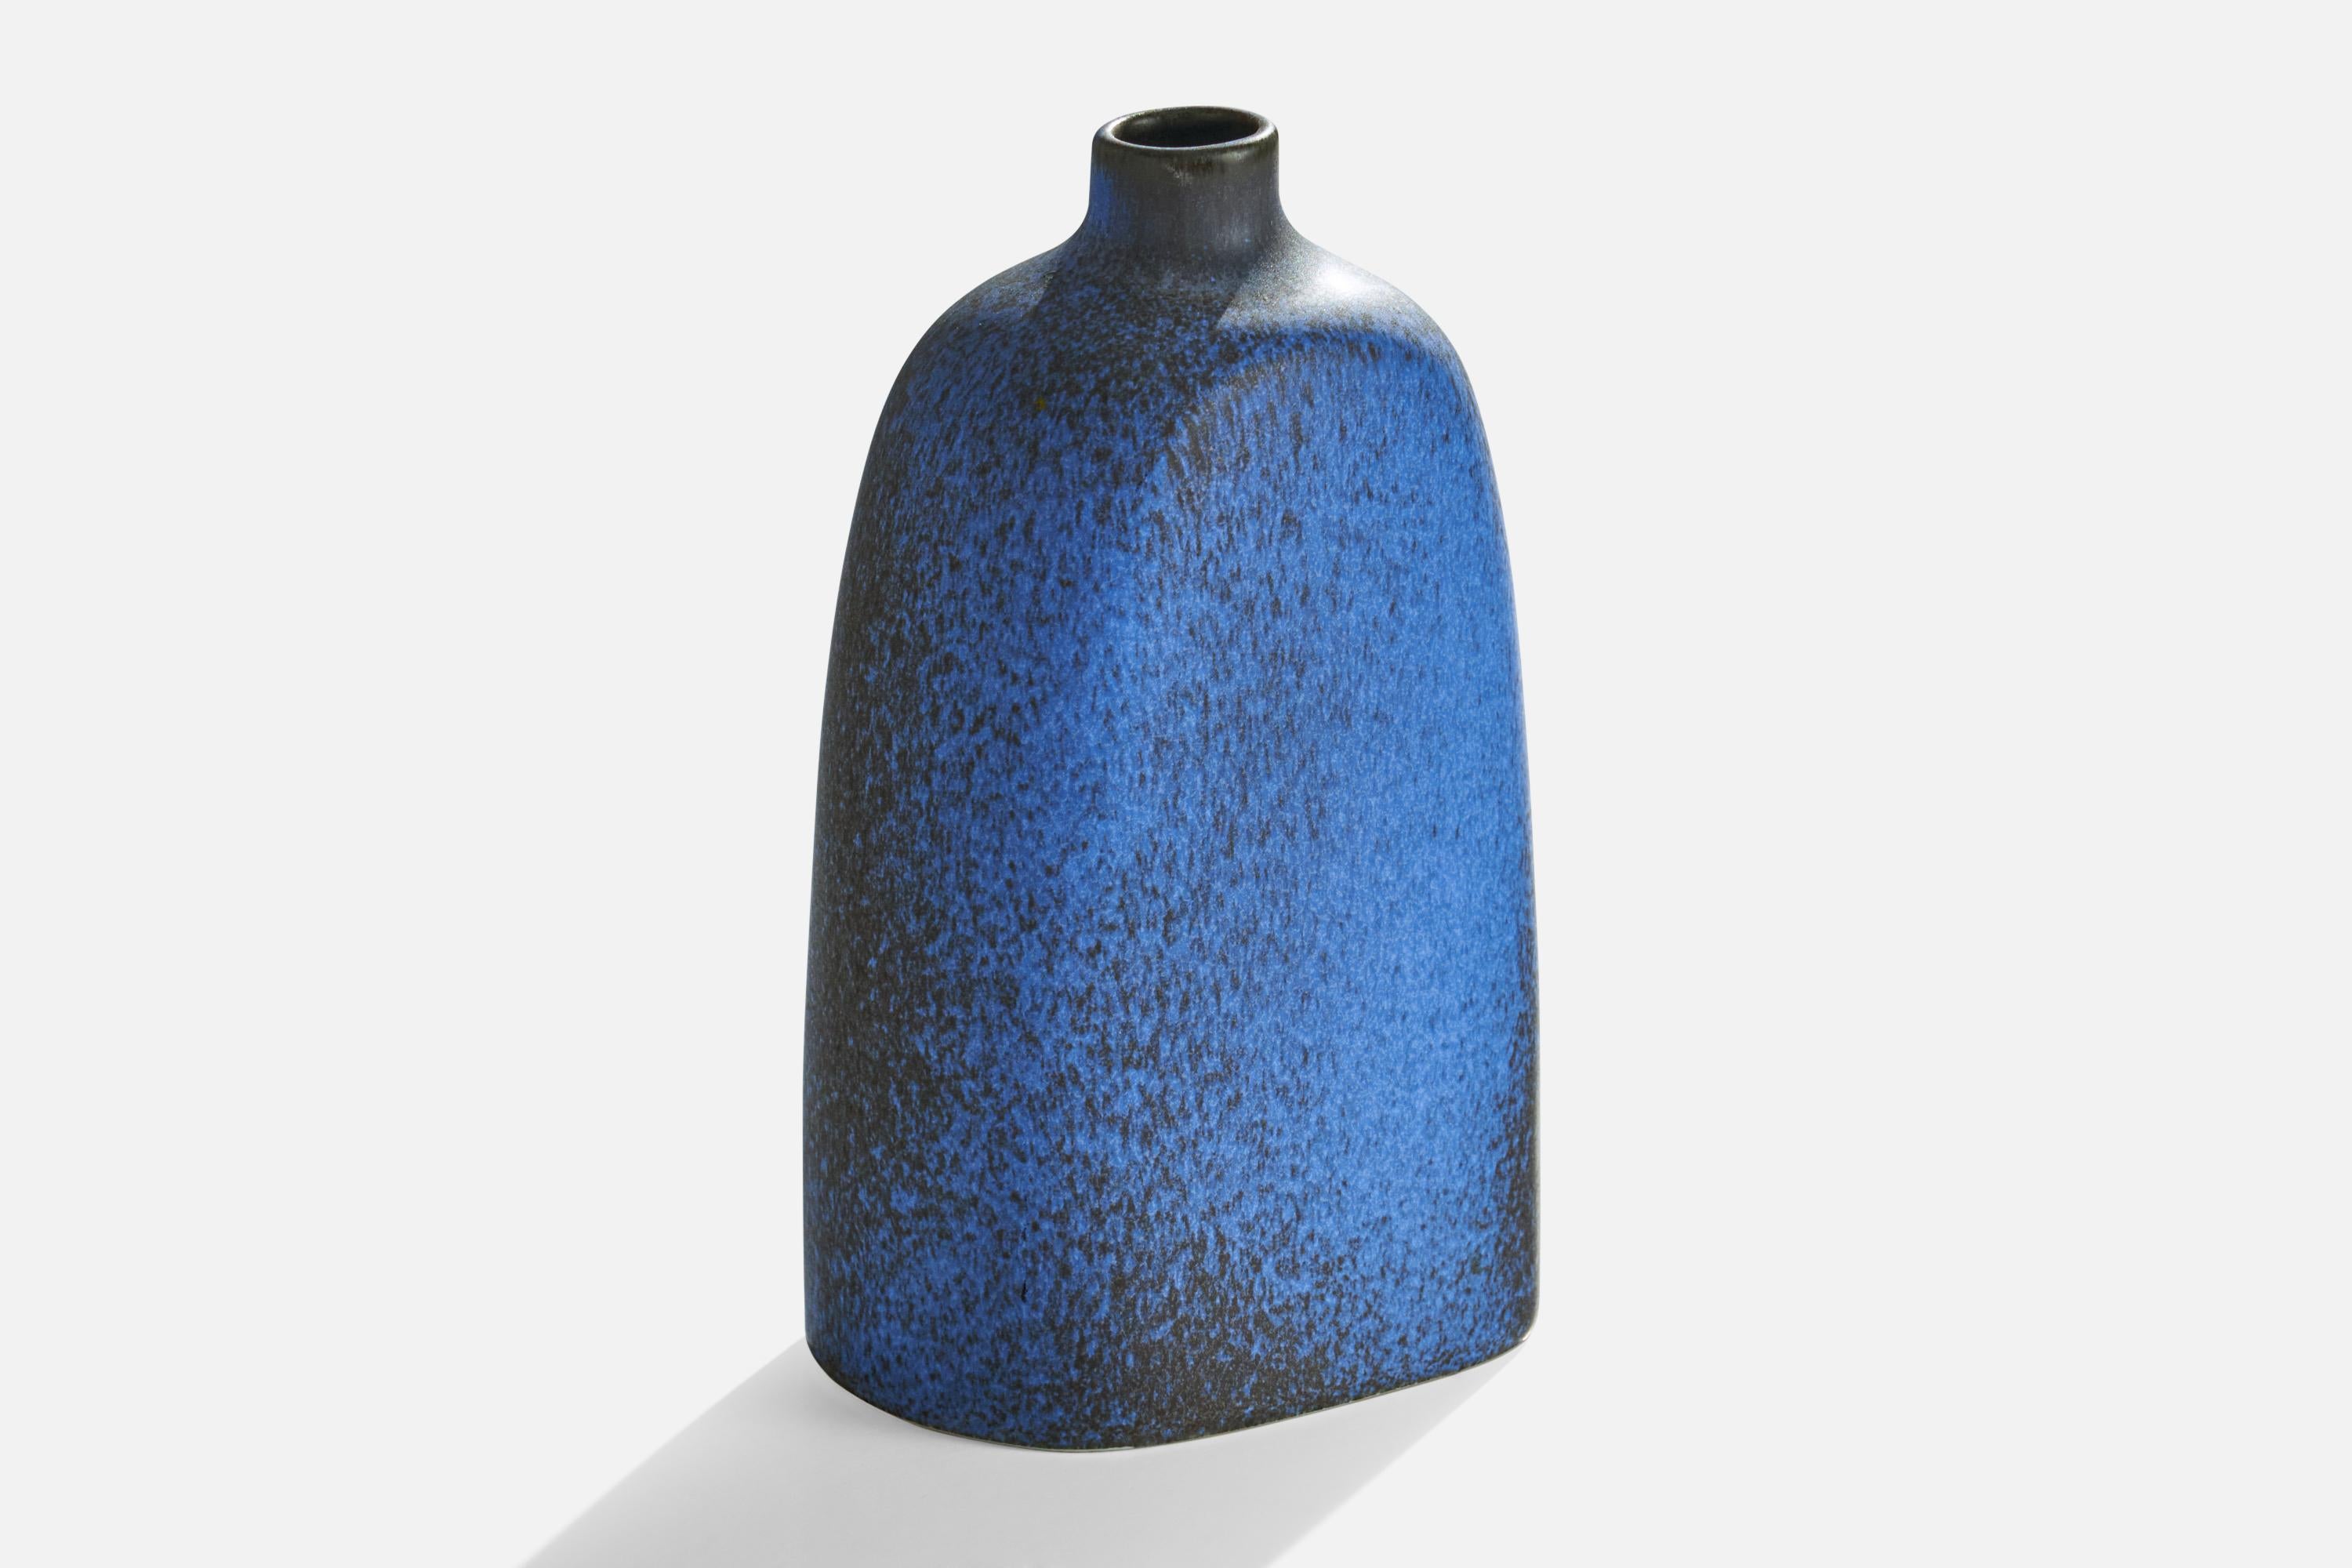 A blue and grey-glazed ceramic vase designed by Karin Björquist and produced by Gustavsberg, Sweden, 1950s.